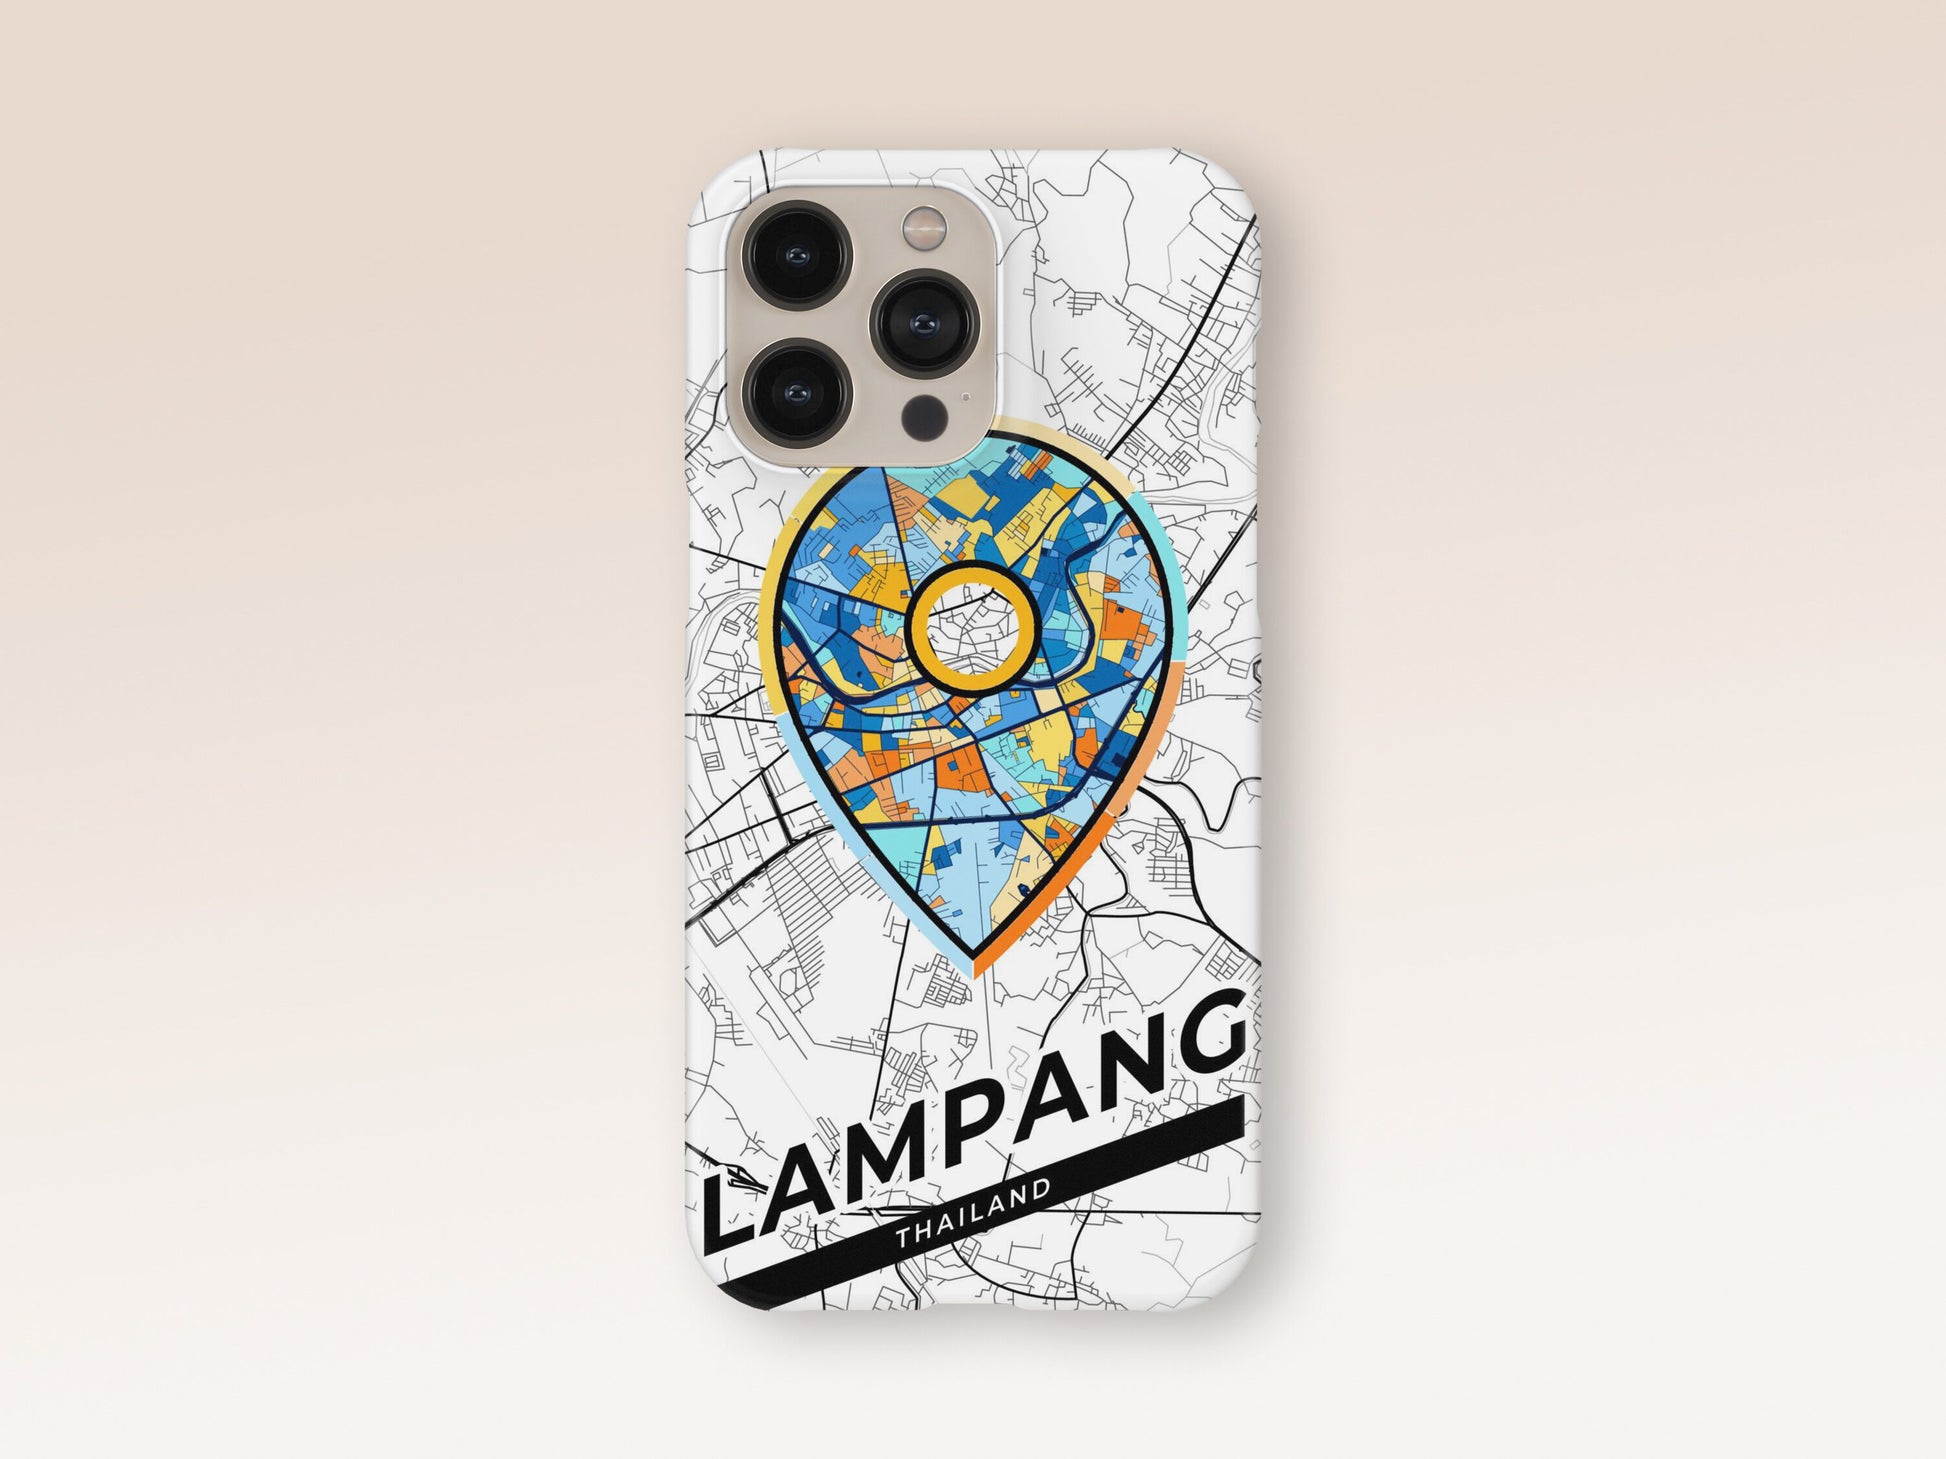 Lampang Thailand slim phone case with colorful icon. Birthday, wedding or housewarming gift. Couple match cases. 1